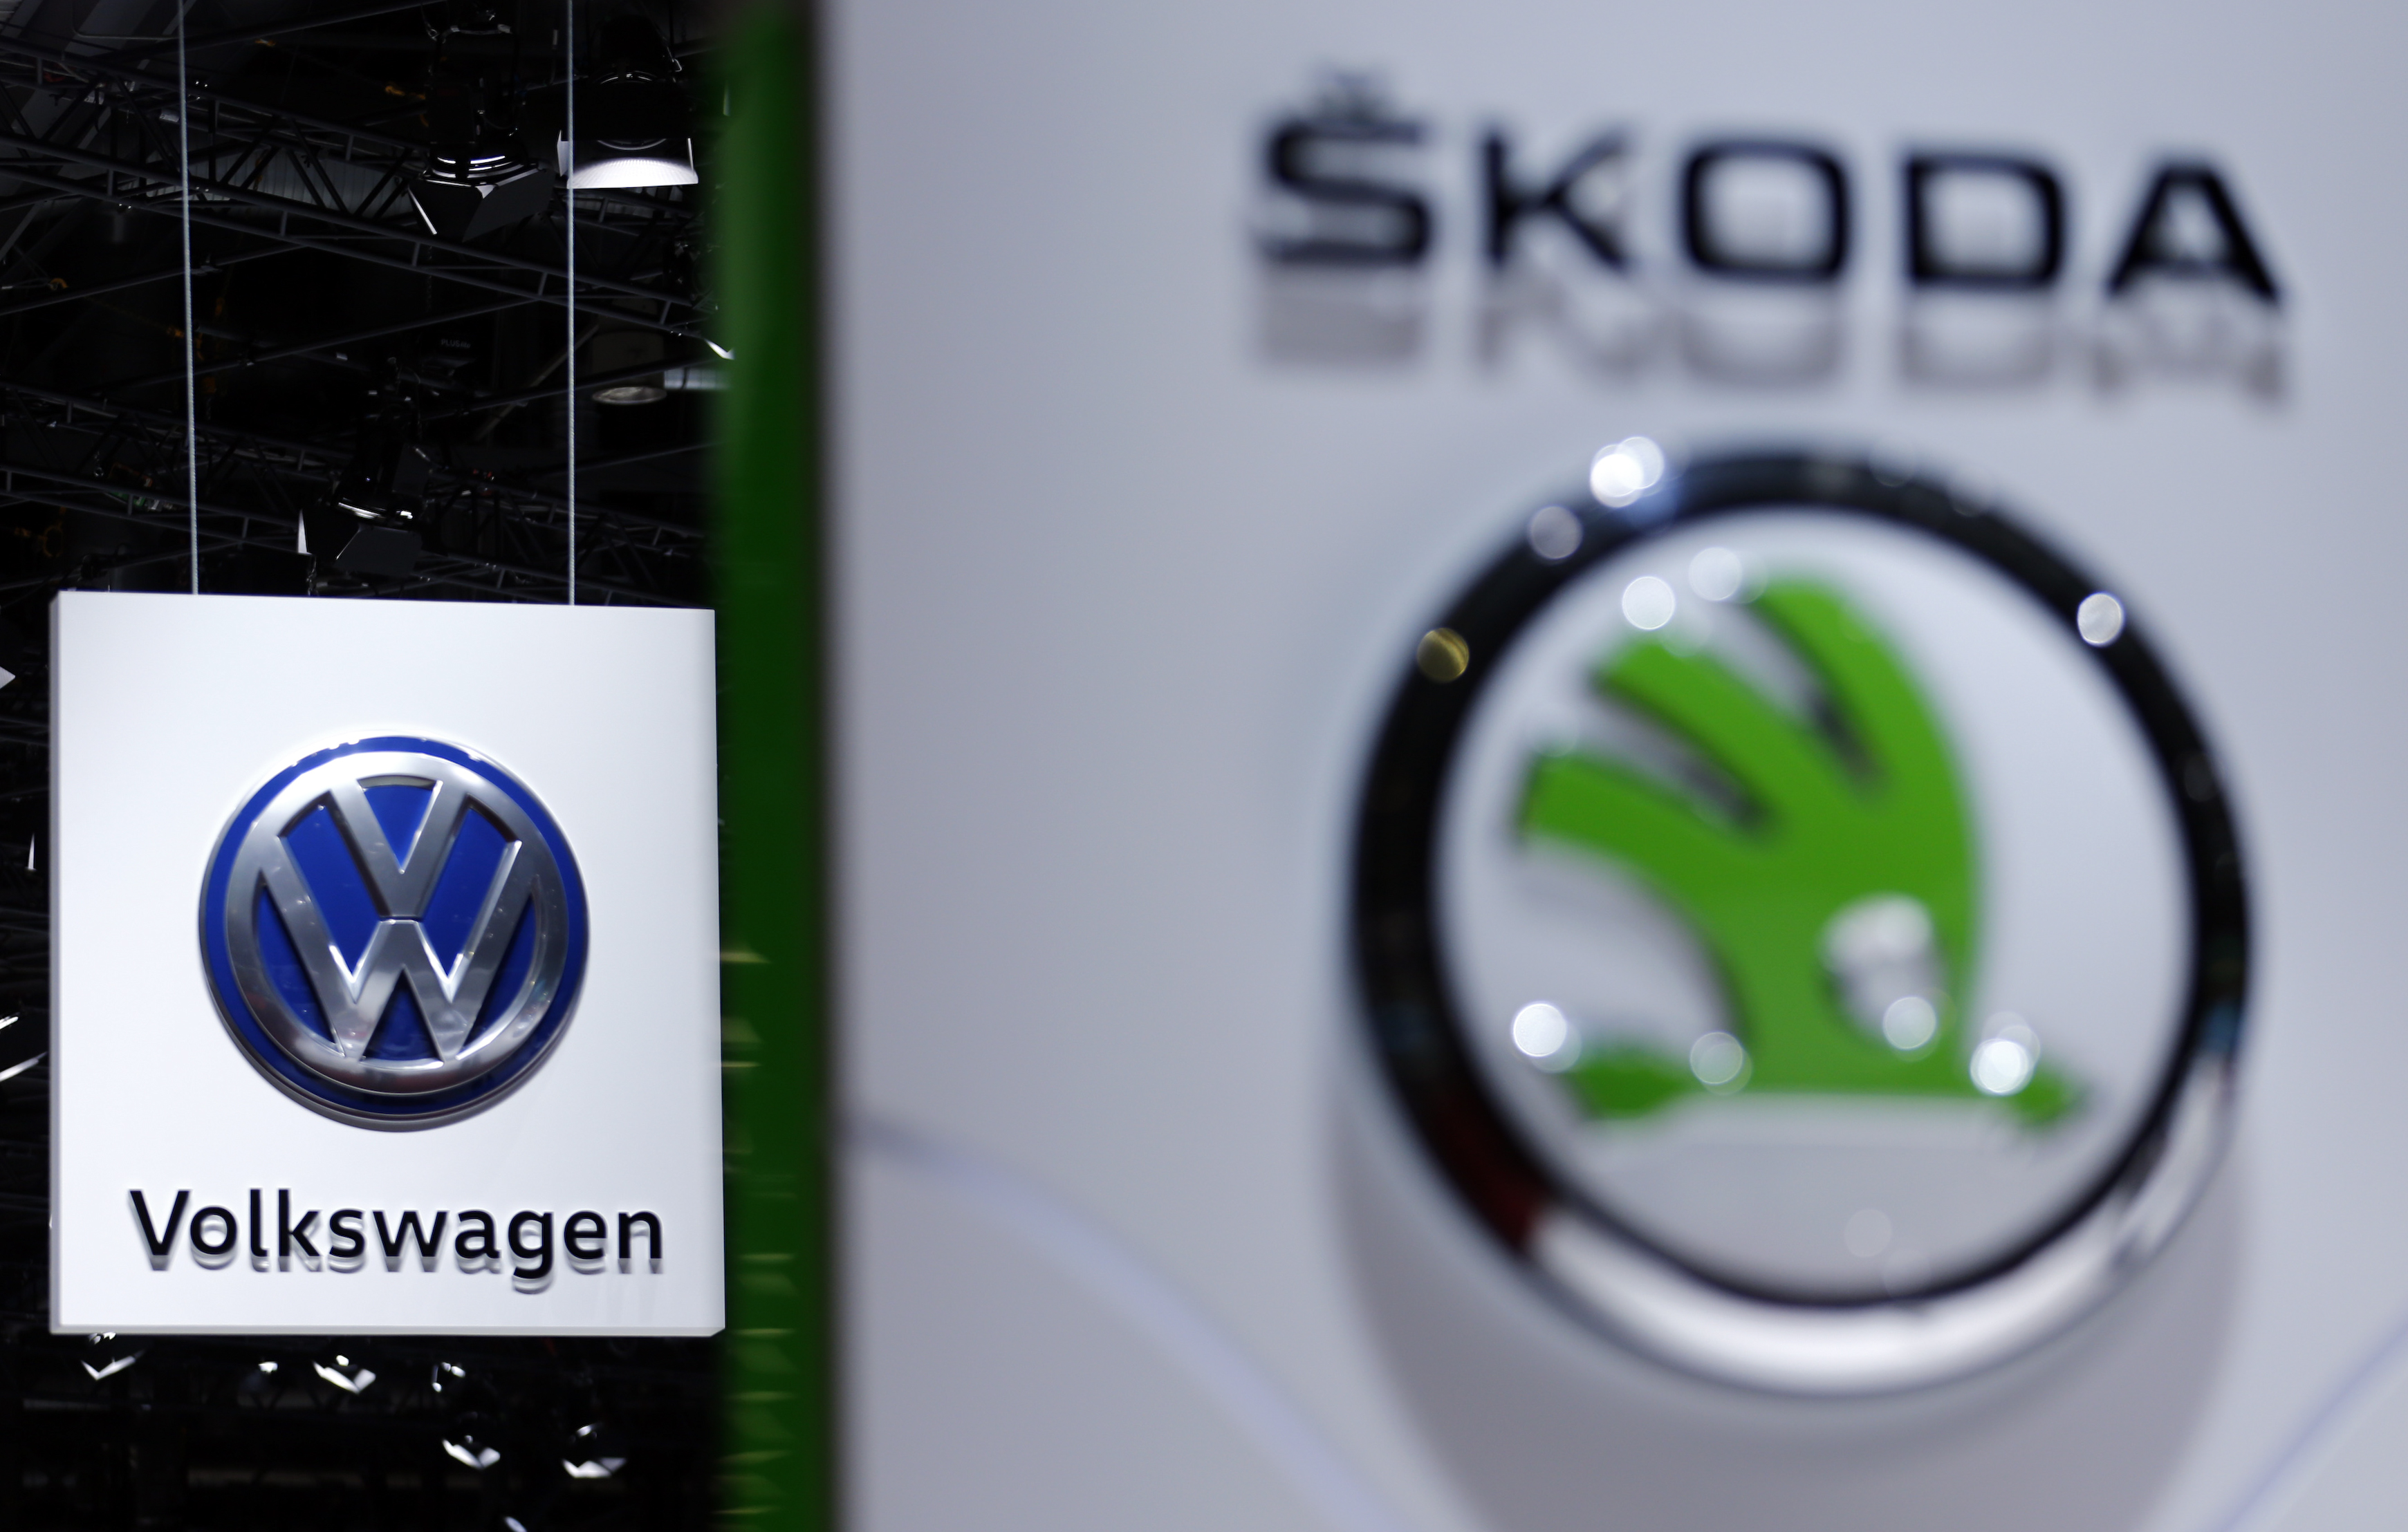 A Volkswagen (VW) logo is pictured next to a logo of Skoda during the second media day of the 86th International Motor Show in Geneva